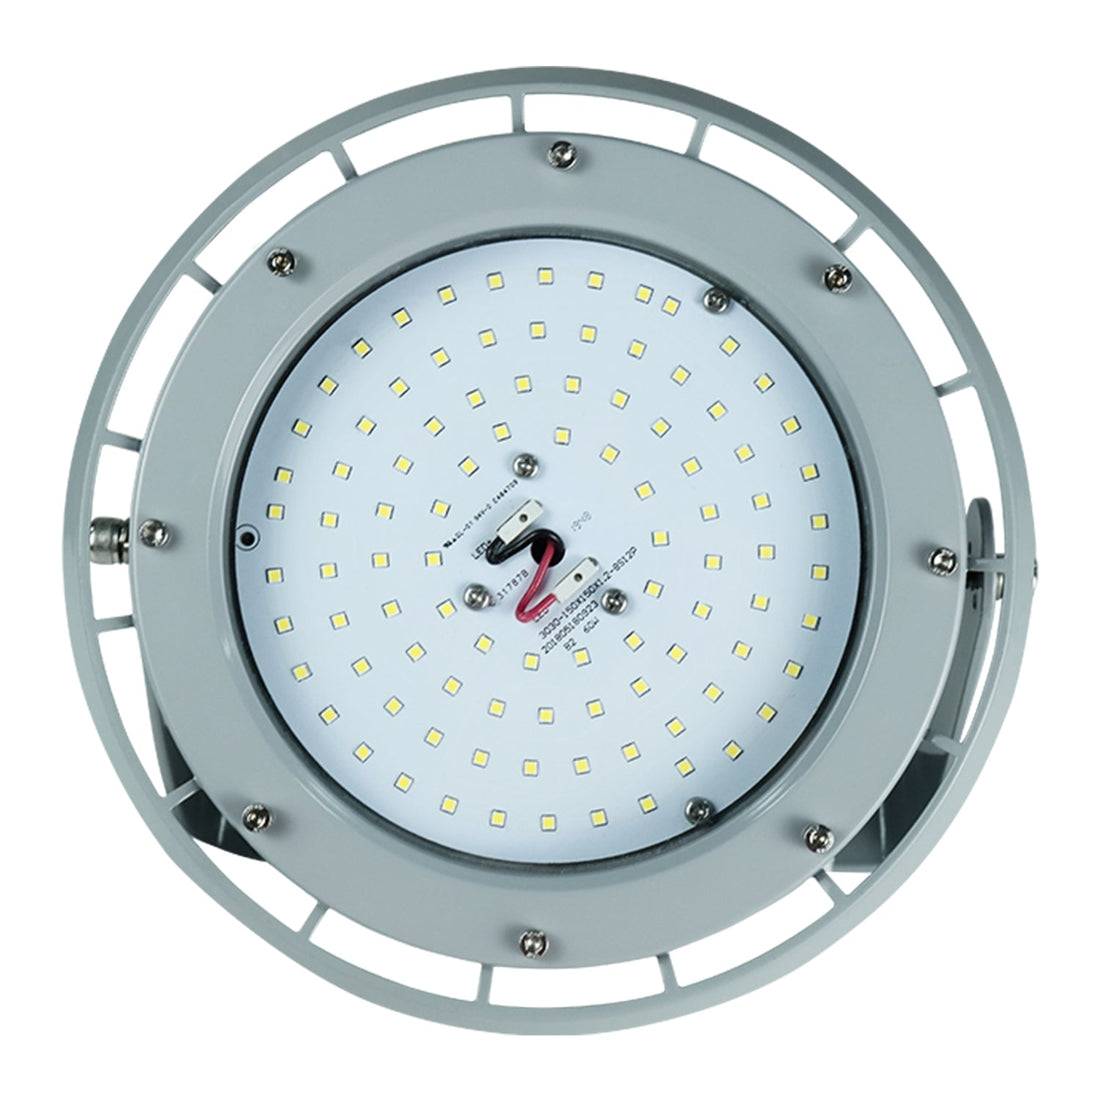 B Series 300W Dimmable LED Explosion Proof Round High Bay Light - 5000K, 42000LM, IP66 Rated for Hazardous Locations - Ideal for Oil &amp; Gas Refineries, Drilling Rigs, Petrochemical Facilities